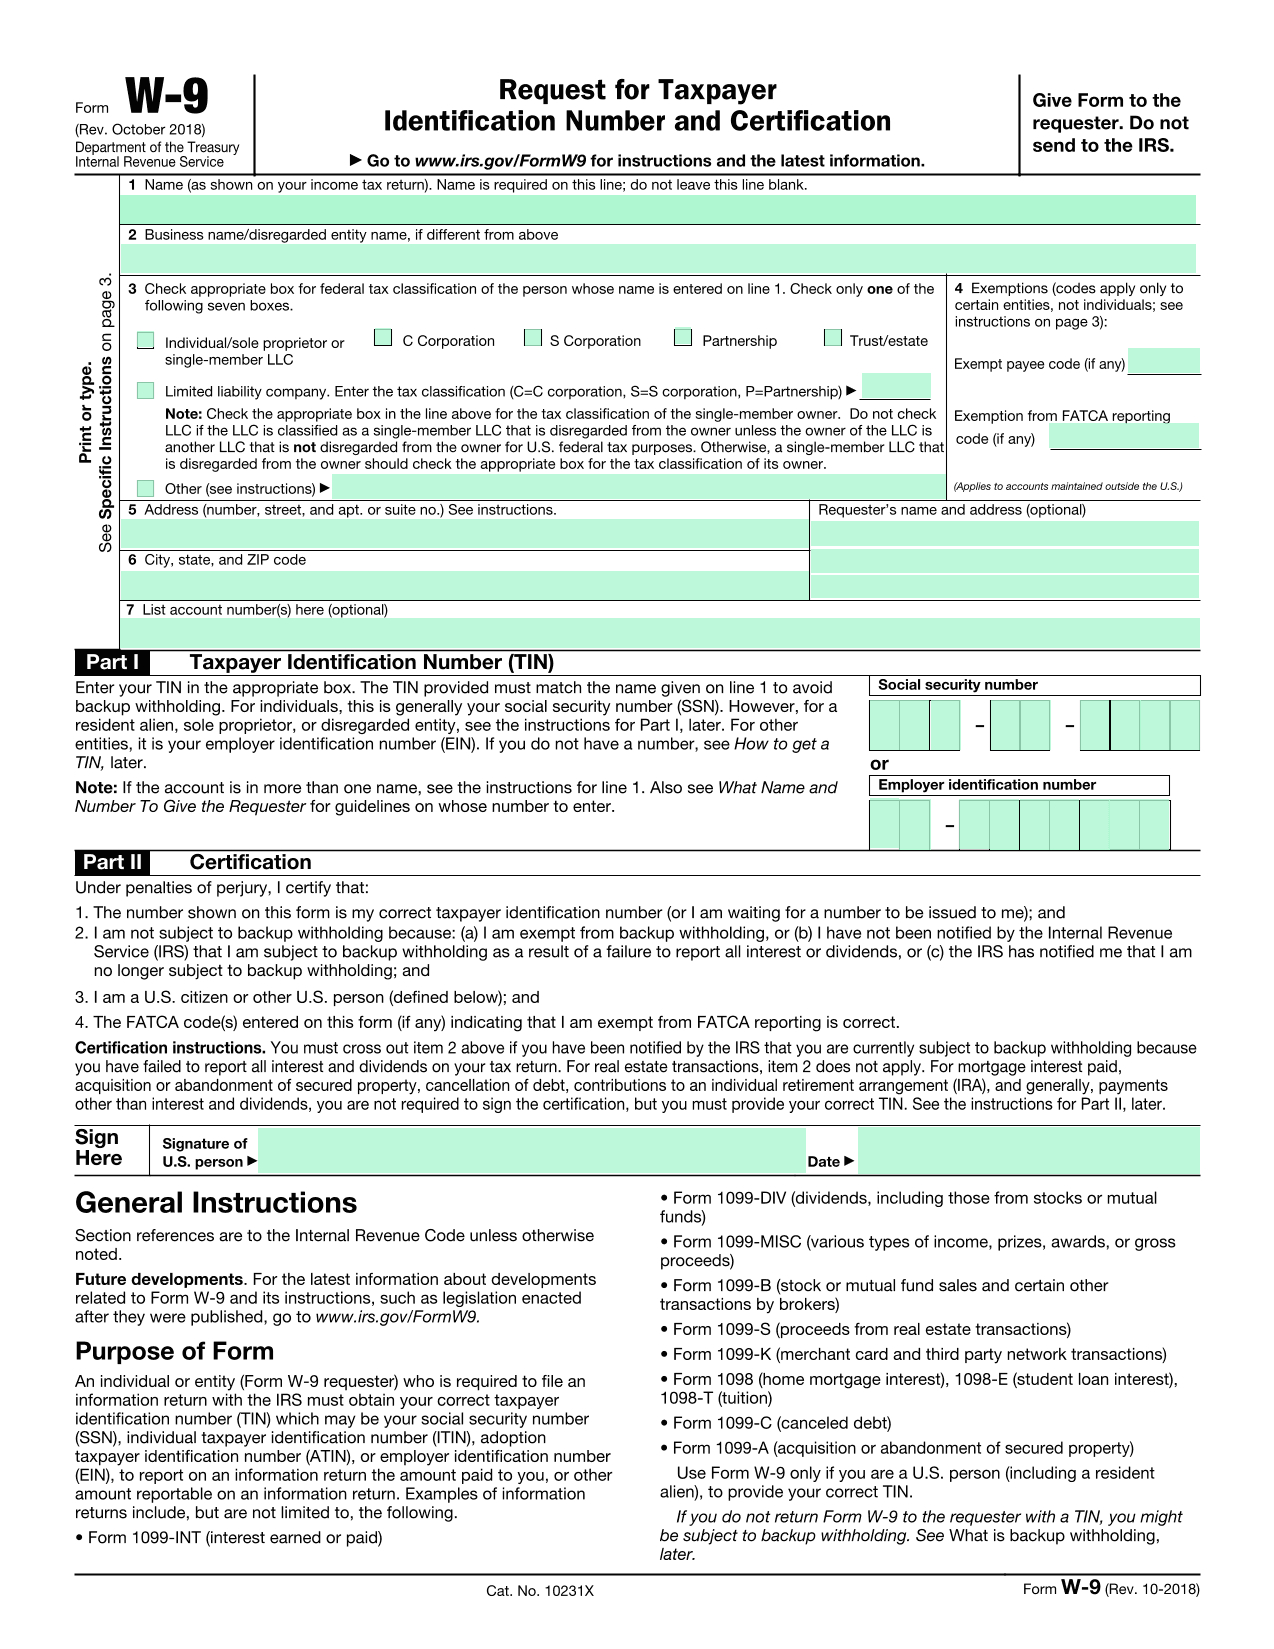 Irs W-9 throughout IRS I9 Form